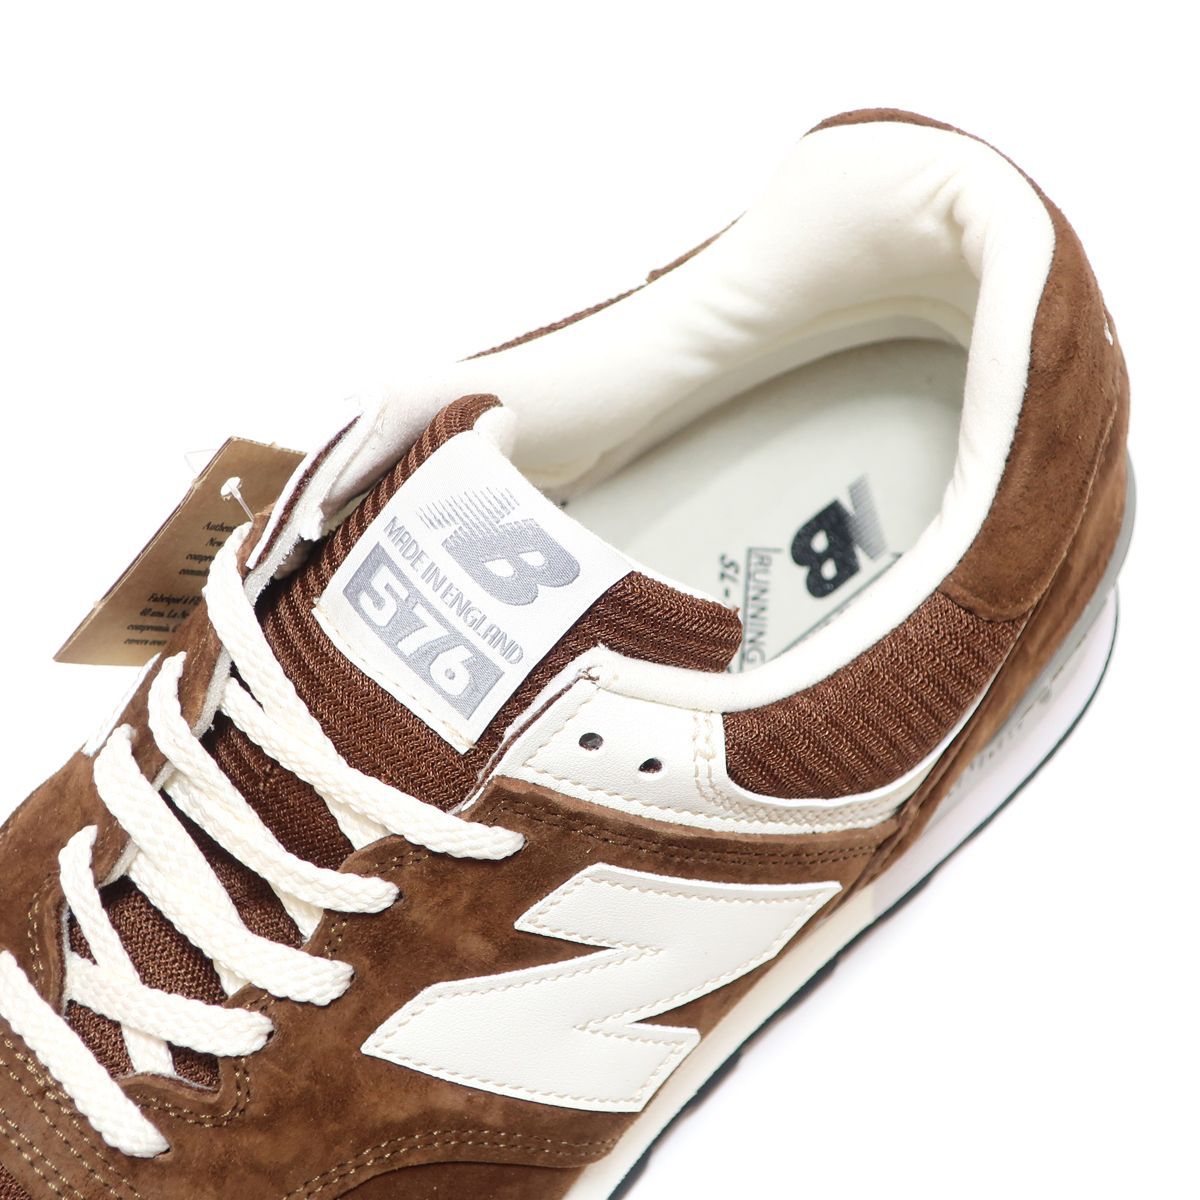 NEW BALANCE OU576BRN BROWN SUEDE MADE IN UK M576 ENGLAND ( ニューバランス 576  スウェード ブラウン 茶色 UK製 )